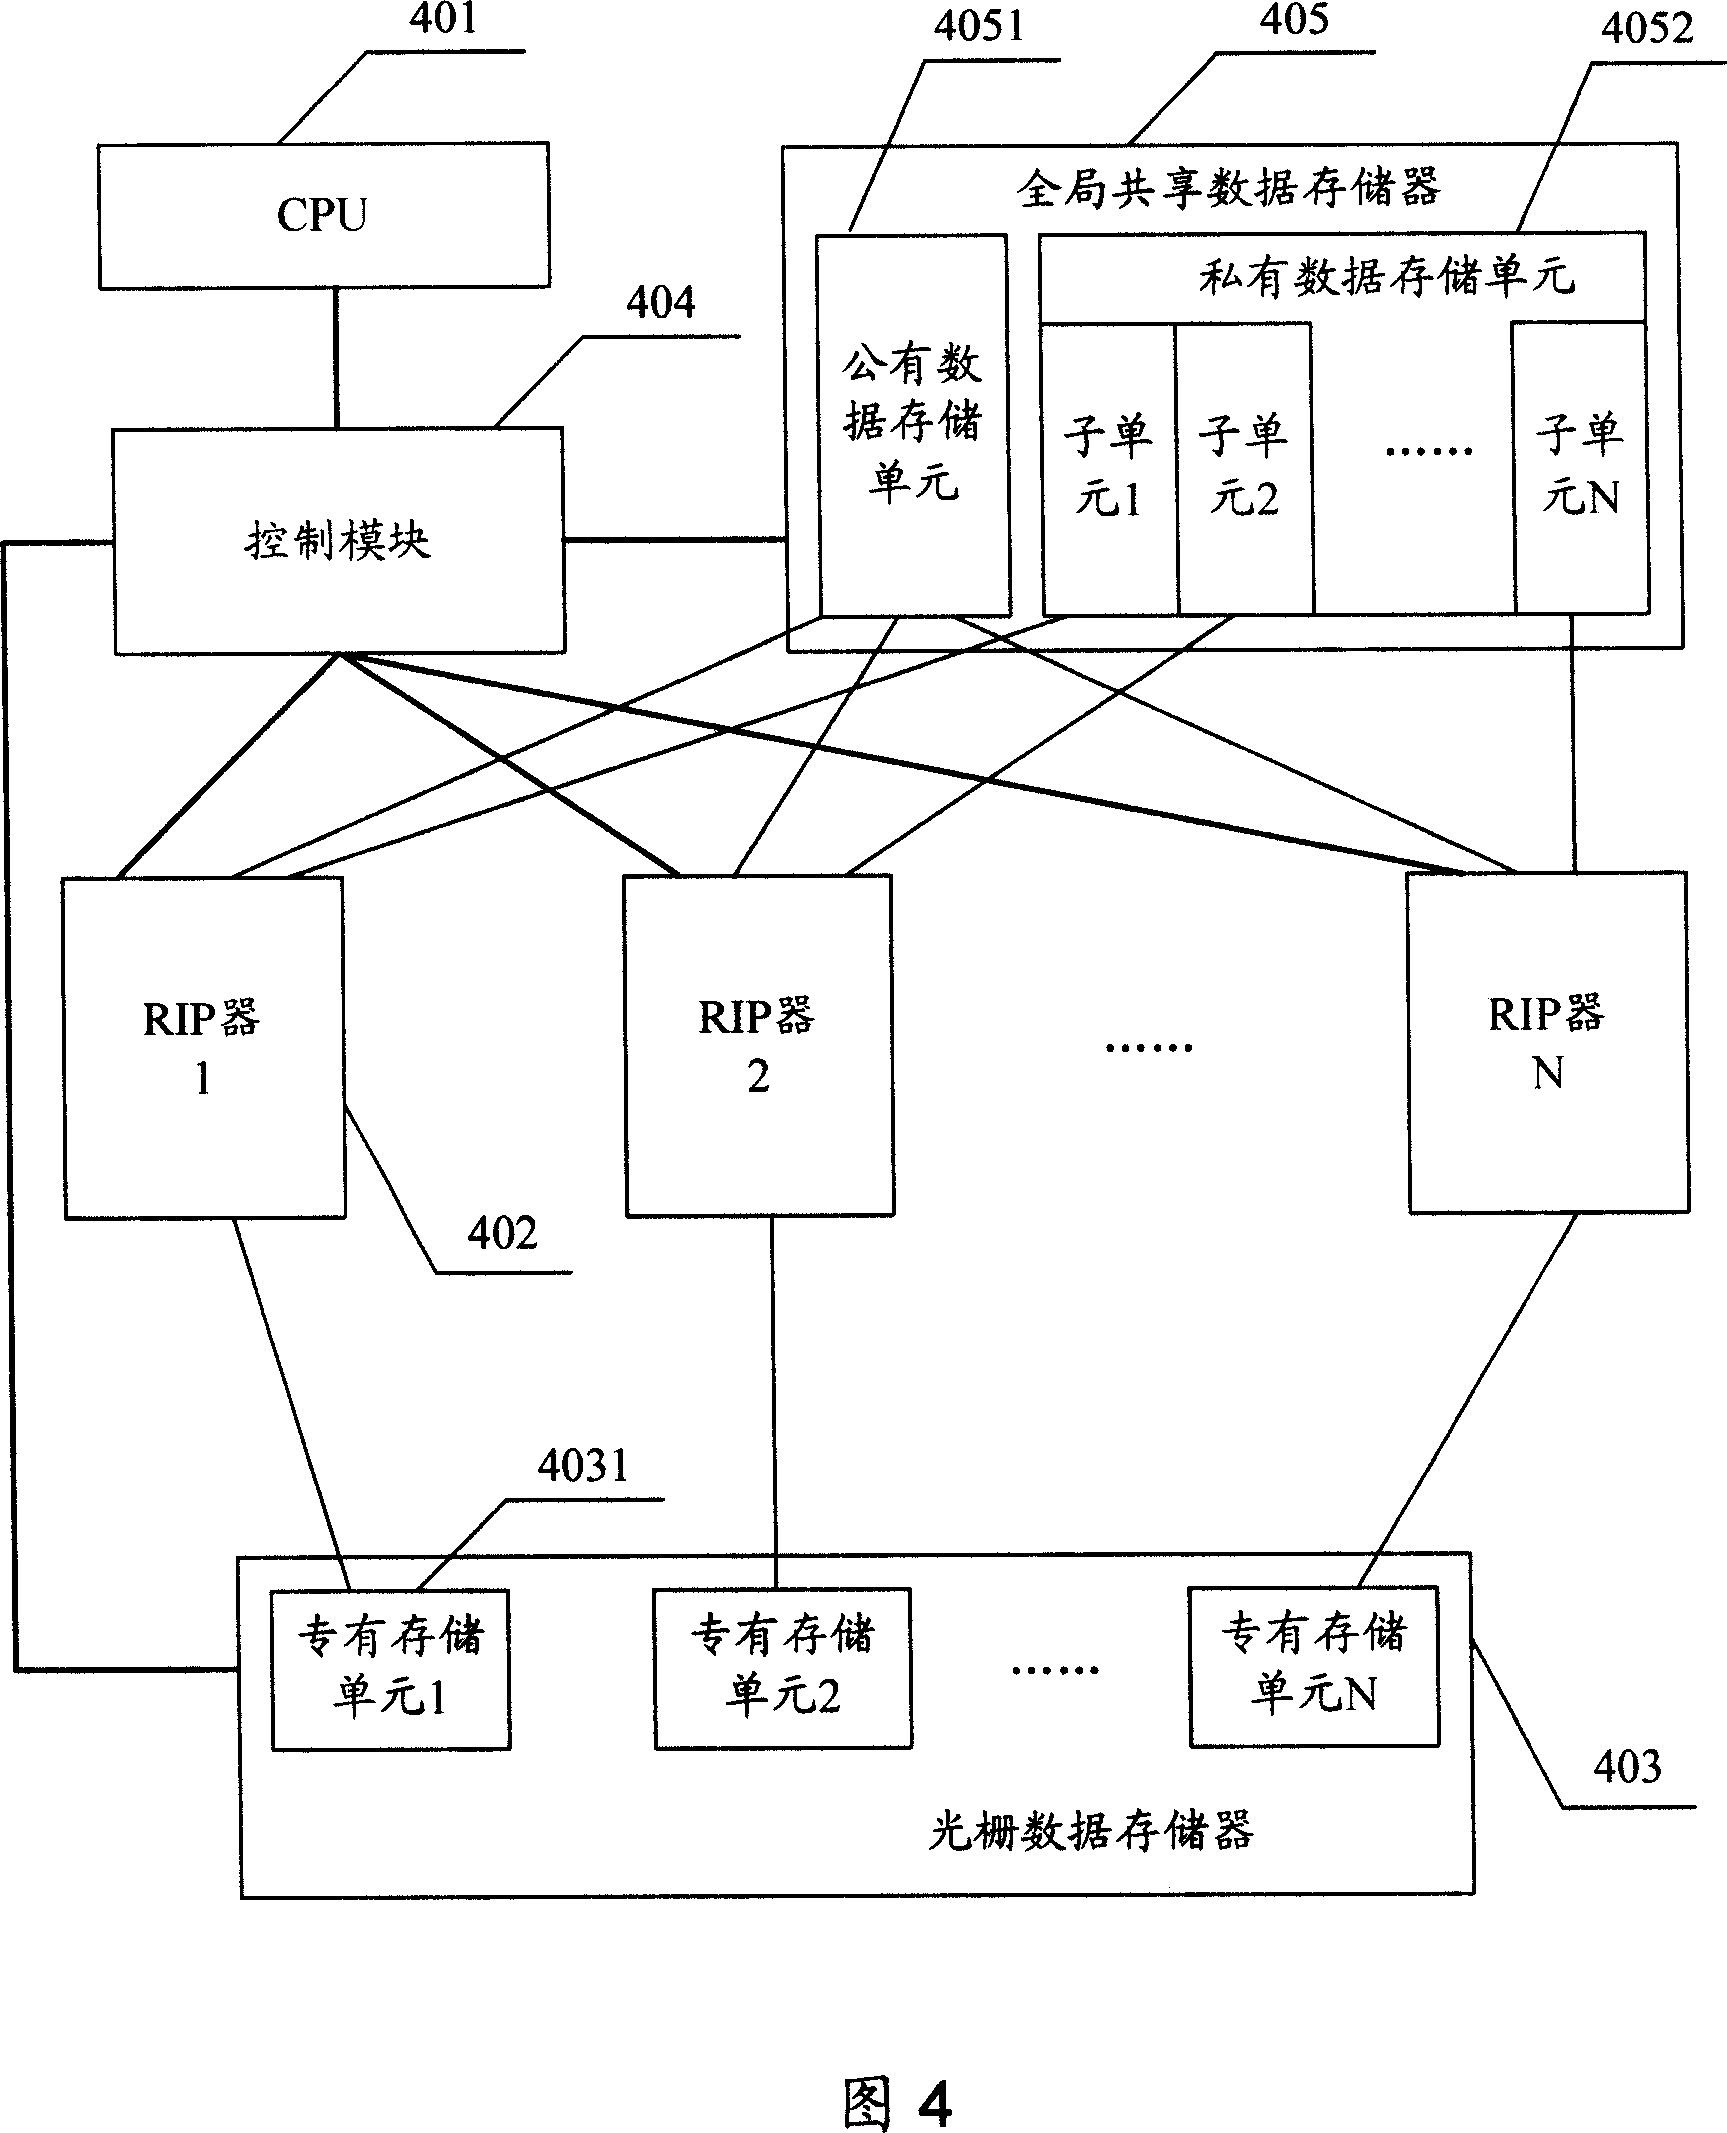 Parallel grating image processing method and system